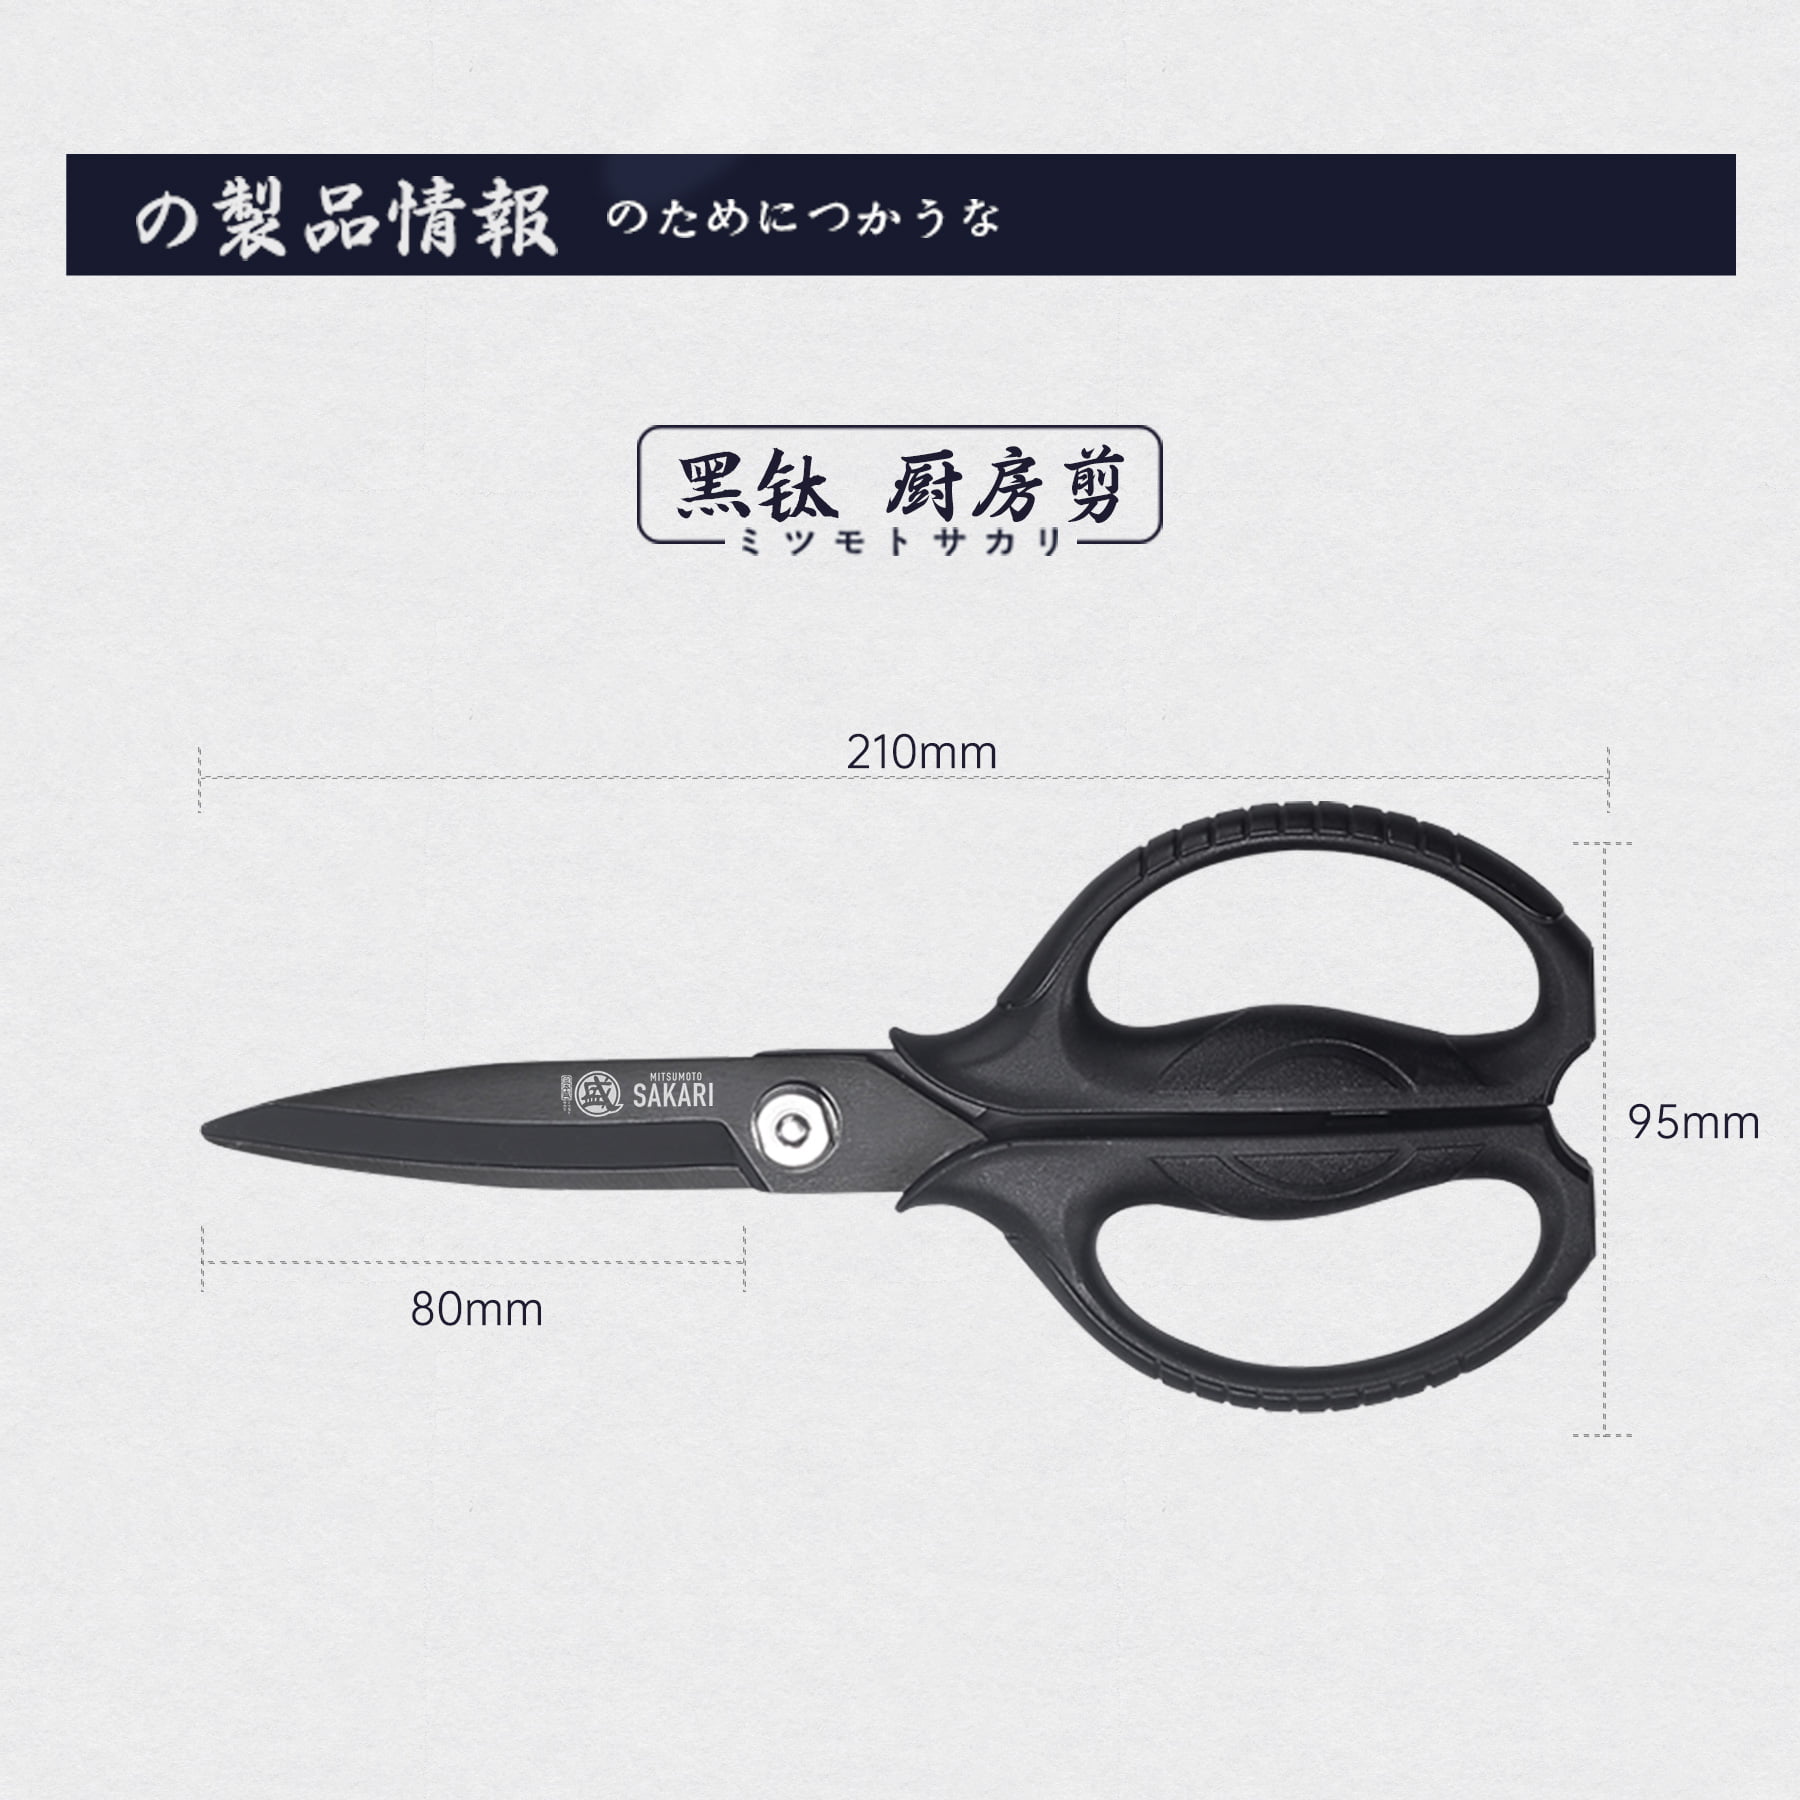 CANARY Japanese Food Scissors 6.8 Small Lightweight, Made in JAPAN,  Dishwasher Safe Come Apart Blade, Easy Clean Kitchen Shears with Removable